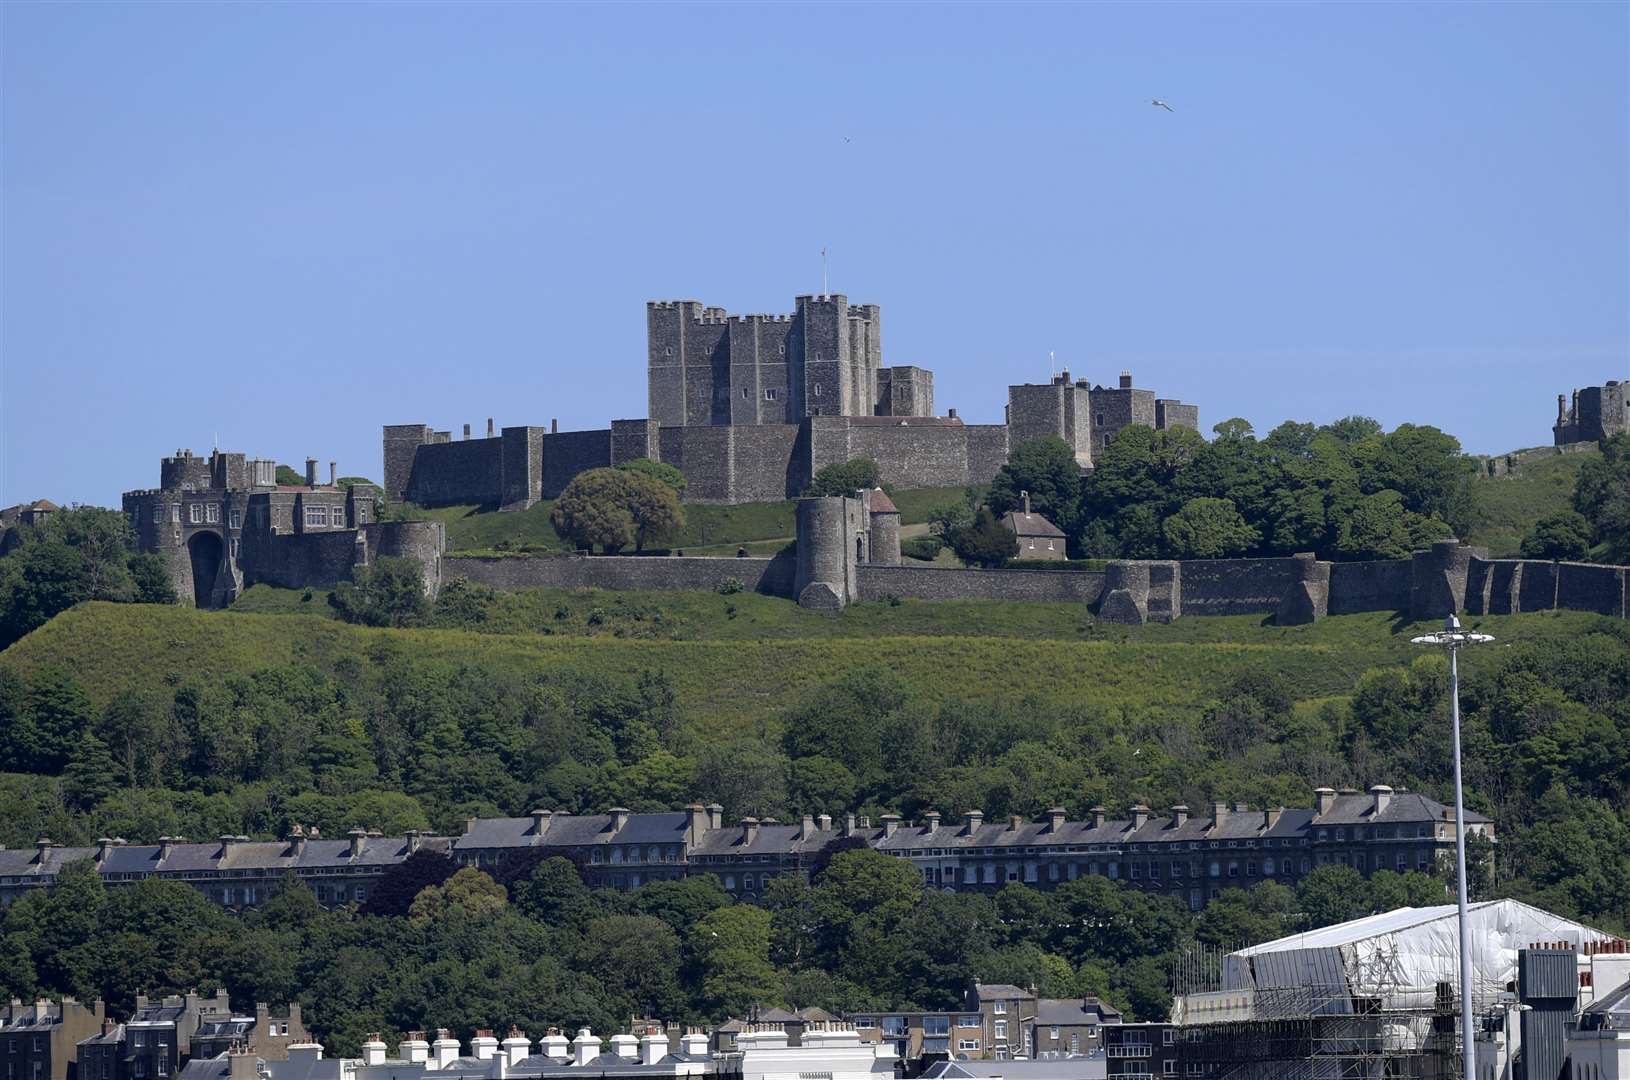 The imposing Dover Castle was built by the Normans in the years after the 1066 invasion